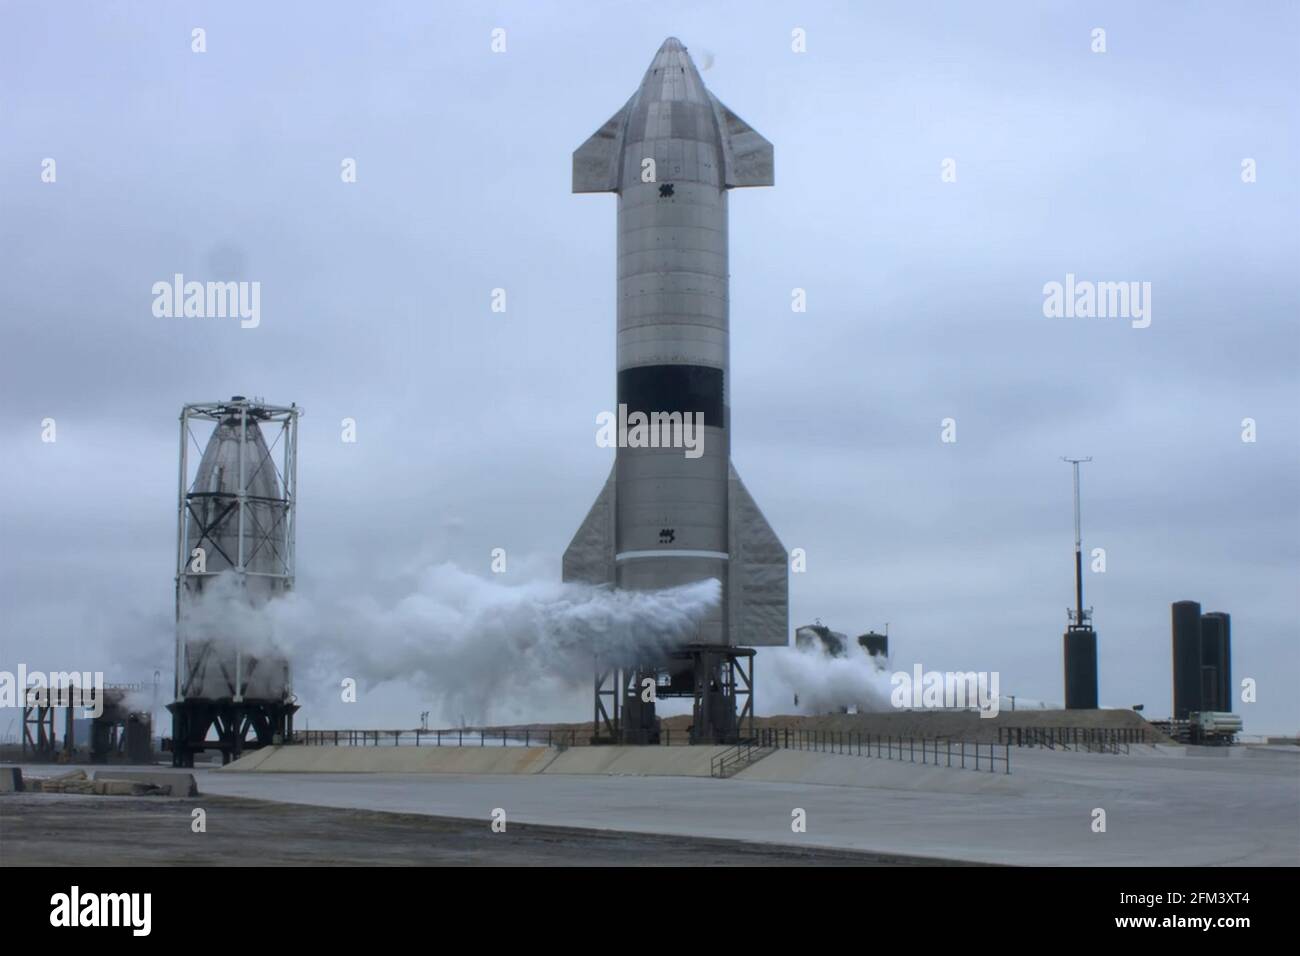 Boca Chica, United States. 05th May, 2021. SpaceX successfully launched and landed Starship SN15 at the company's Starbase spaceport in Boca Chica, Texas, on Wednesday, May 5, 2021, after failing to stick the landing on four previous attempts. Following SN15's successful test flight, SpaceX founder and CEO Elon Musk posted on Twitter: "Starship landing nominal!" SpaceX/UPI Credit: UPI/Alamy Live News Stock Photo